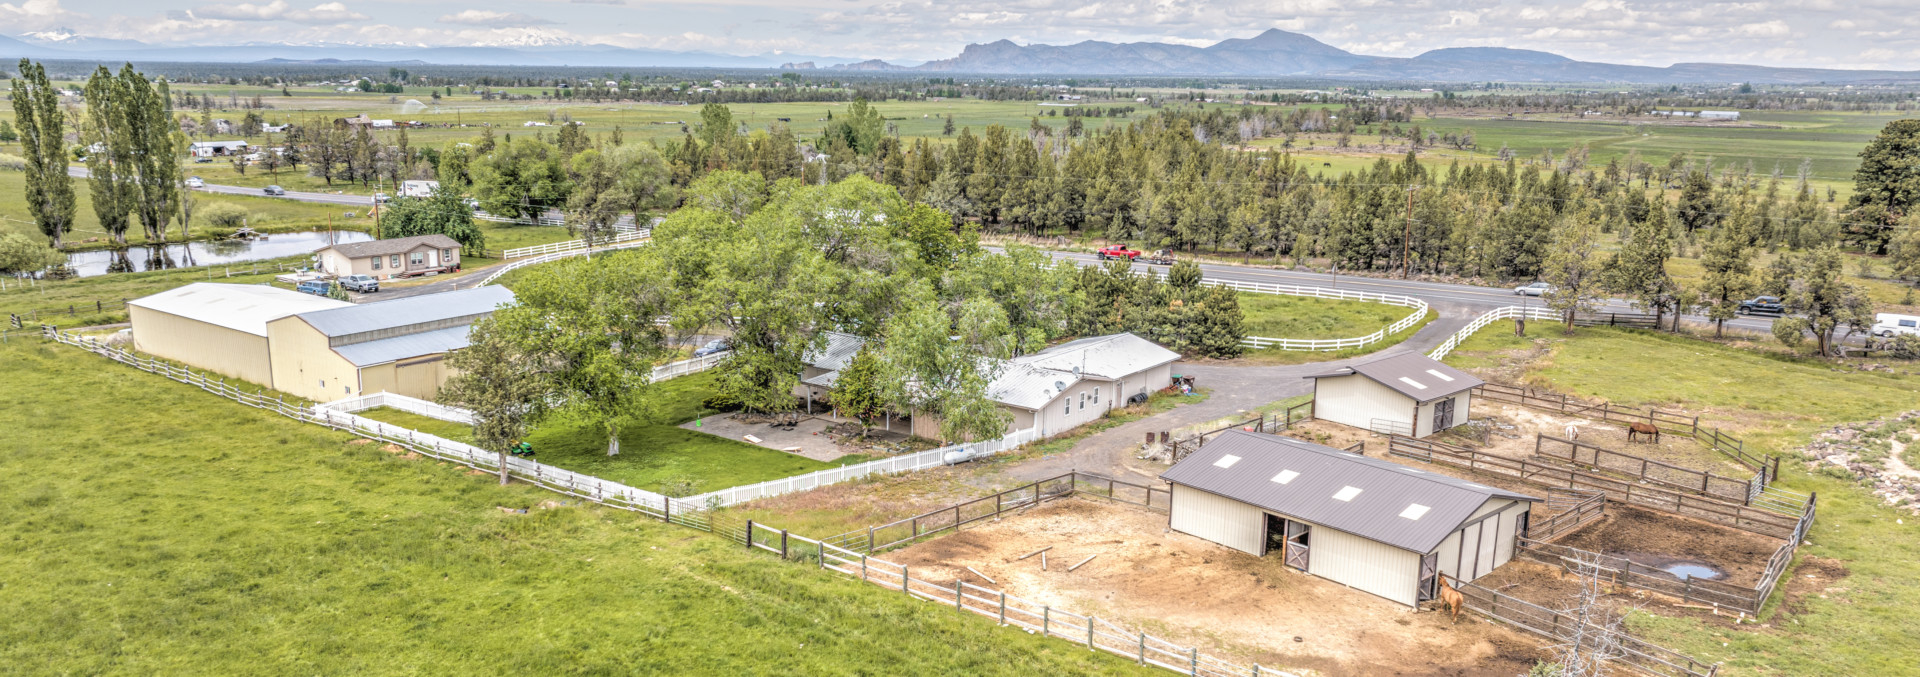 oregon property for sale cow bell ranch